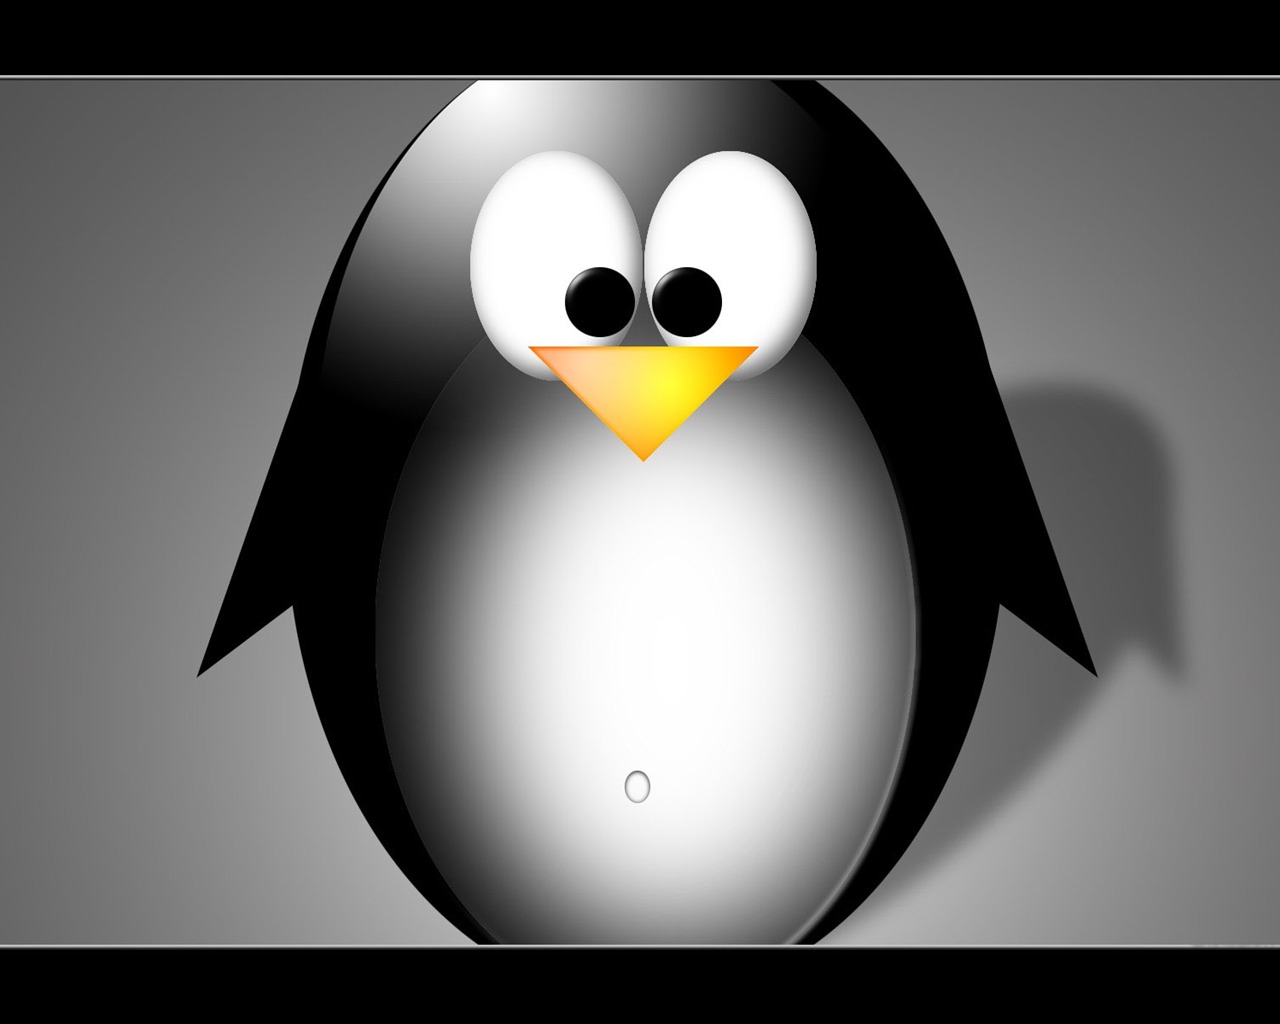 Linux tapety (1) #3 - 1280x1024